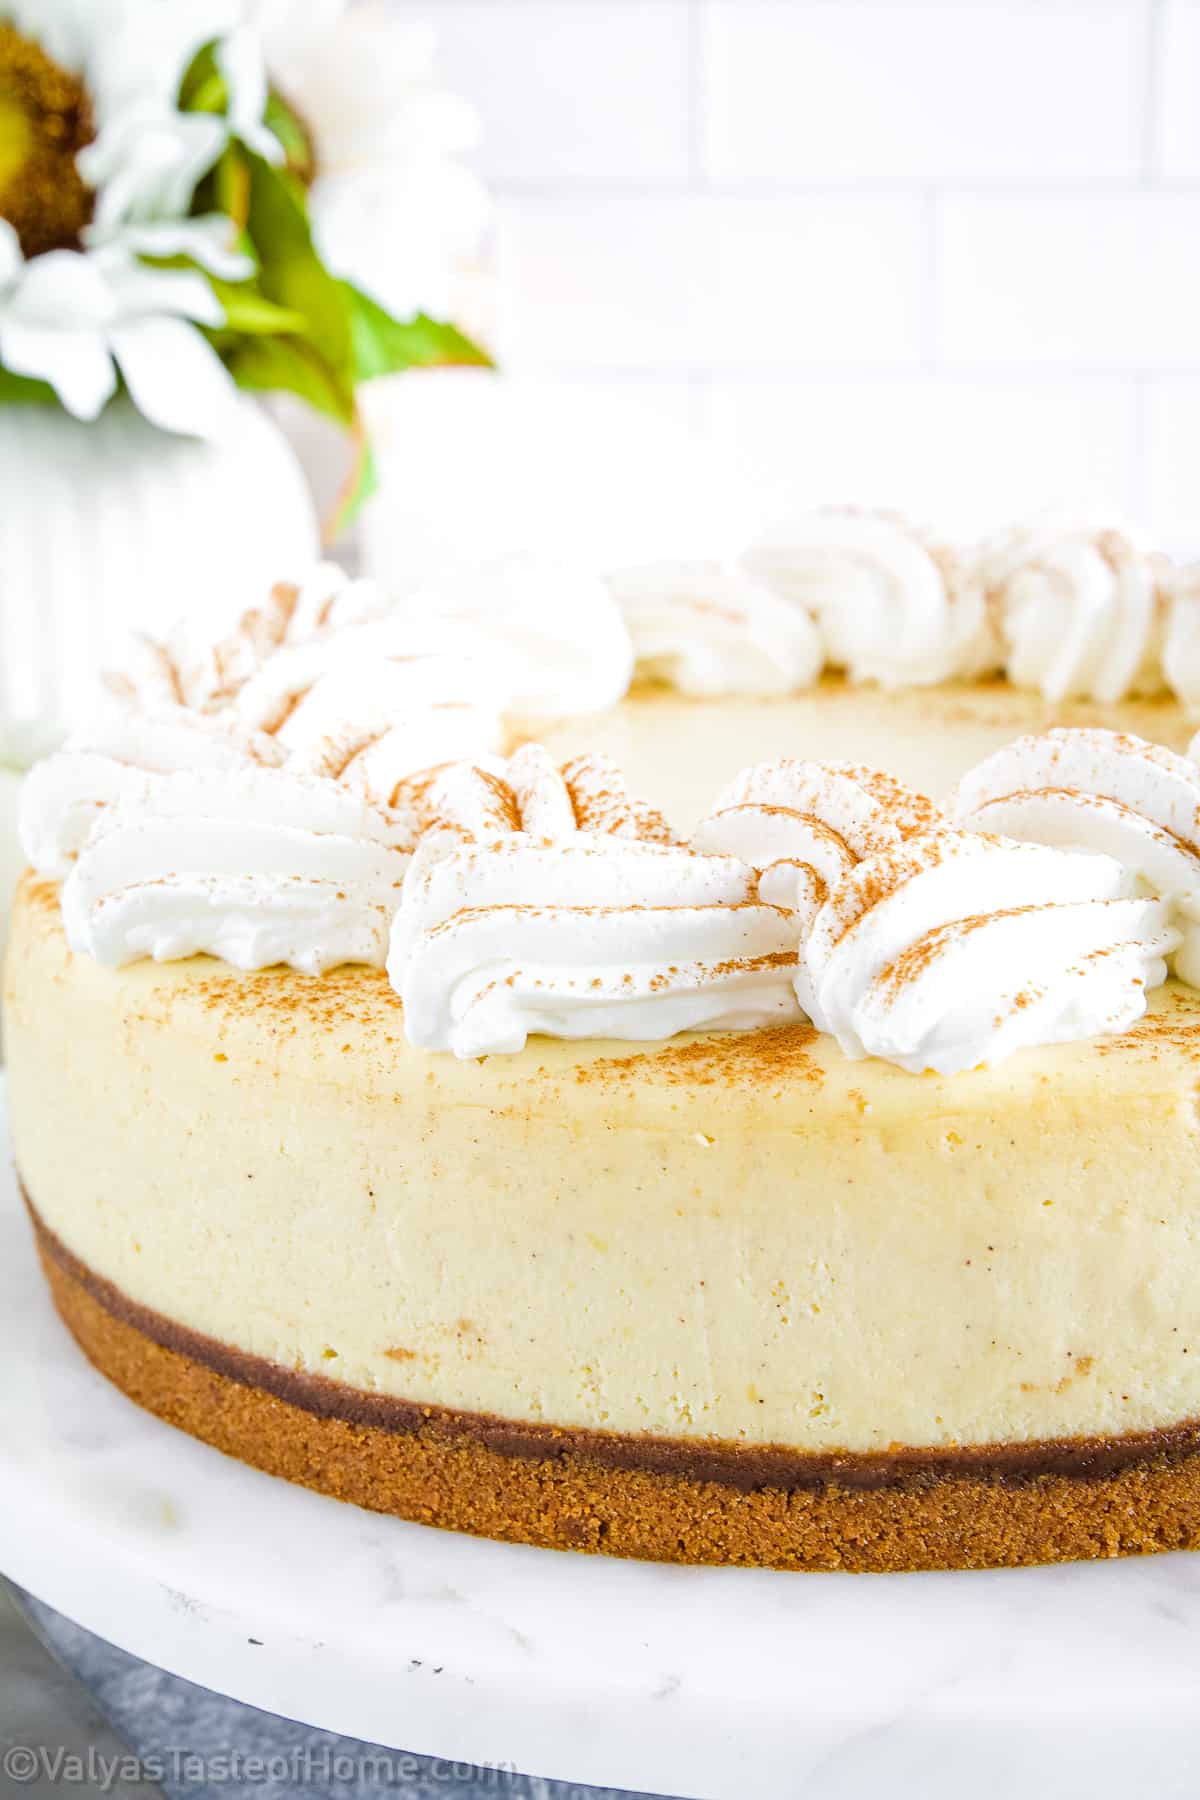 The cheesecake's taste is a delightful balance of sweet and tangy, with the distinct pumpkin flavor shining through.